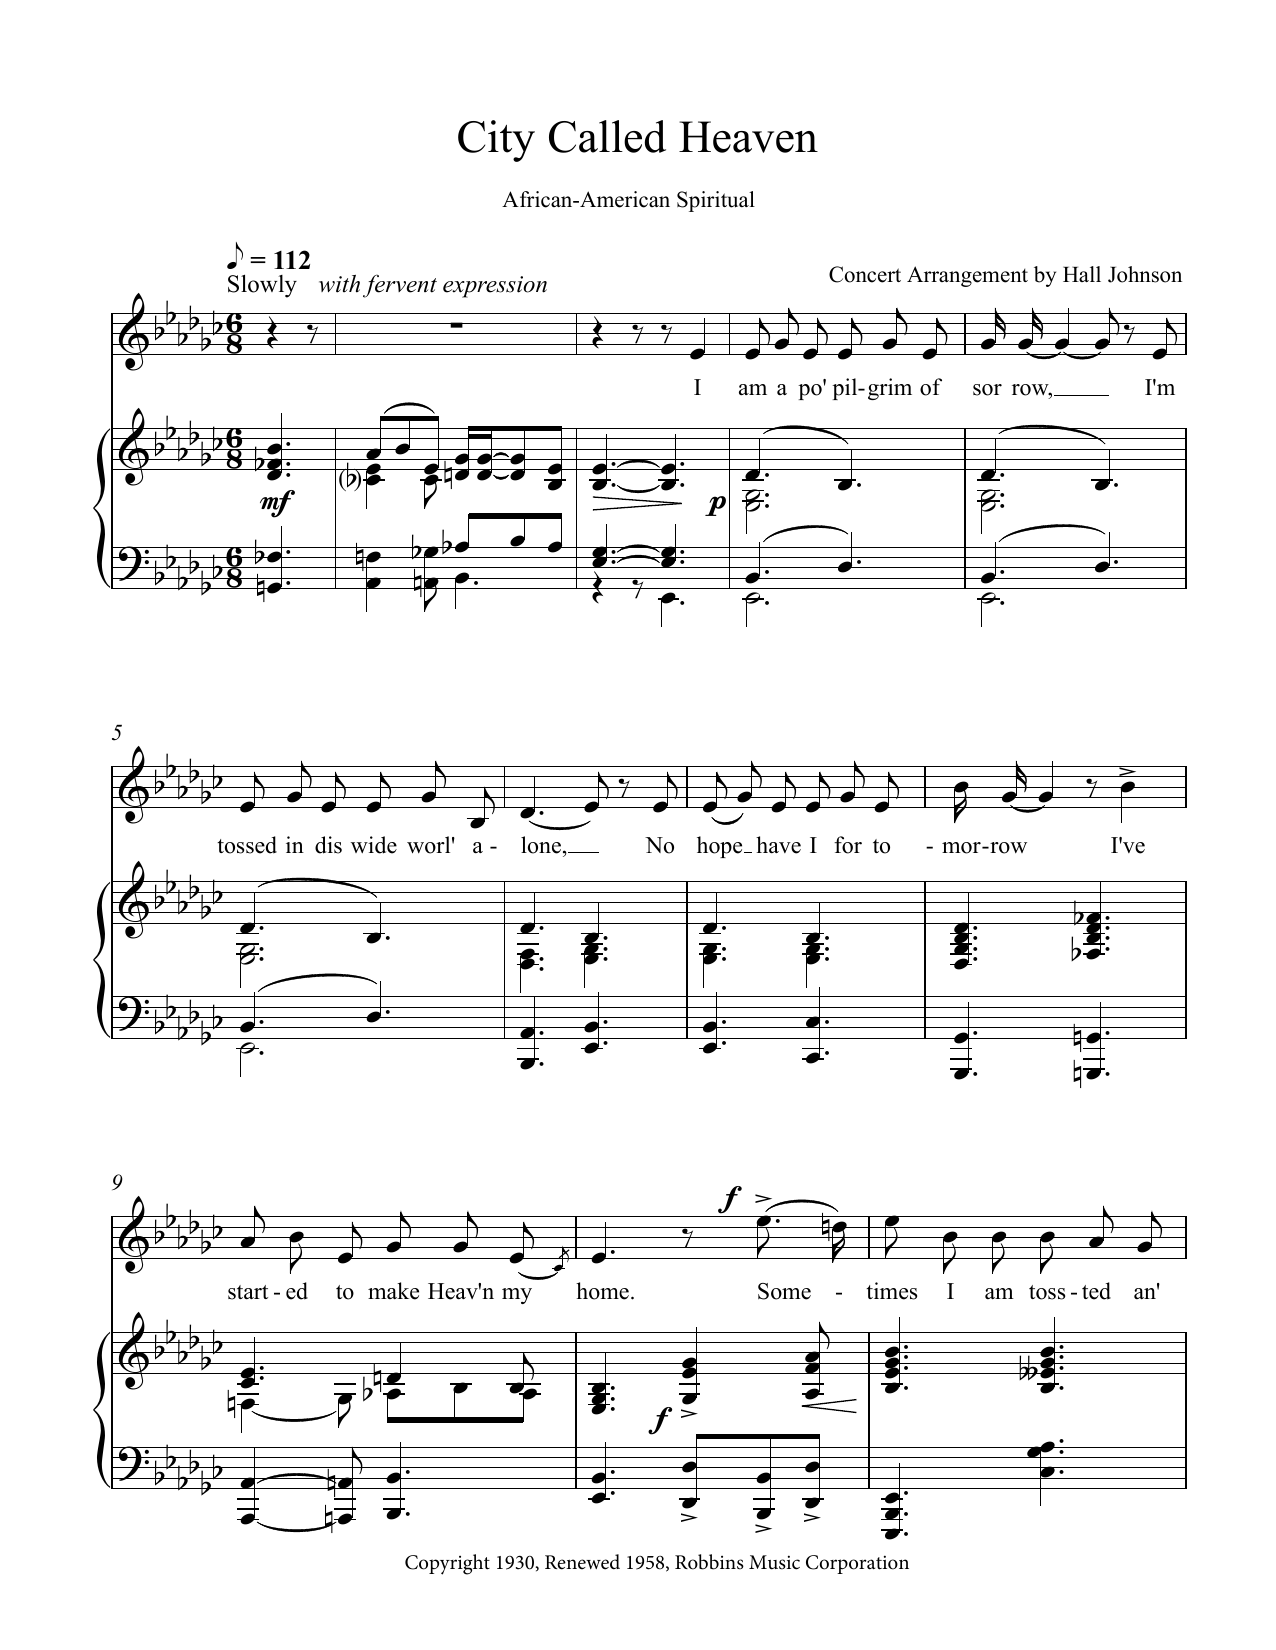 Hall Johnson City Called Heaven (E-flat minor) sheet music notes and chords. Download Printable PDF.